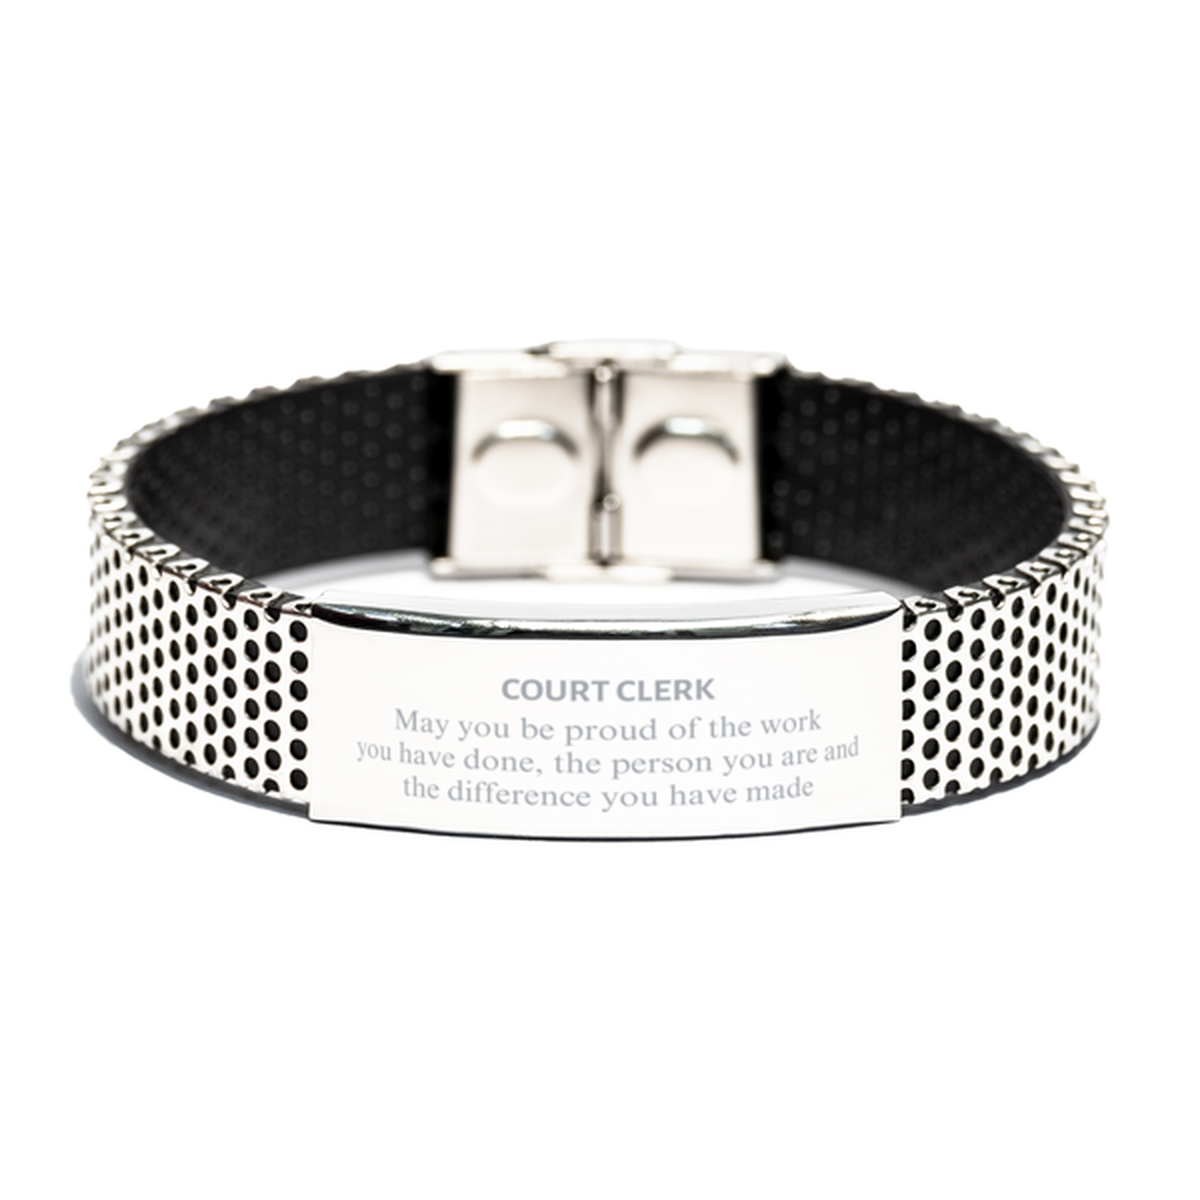 Court Clerk May you be proud of the work you have done, Retirement Court Clerk Stainless Steel Bracelet for Colleague Appreciation Gifts Amazing for Court Clerk